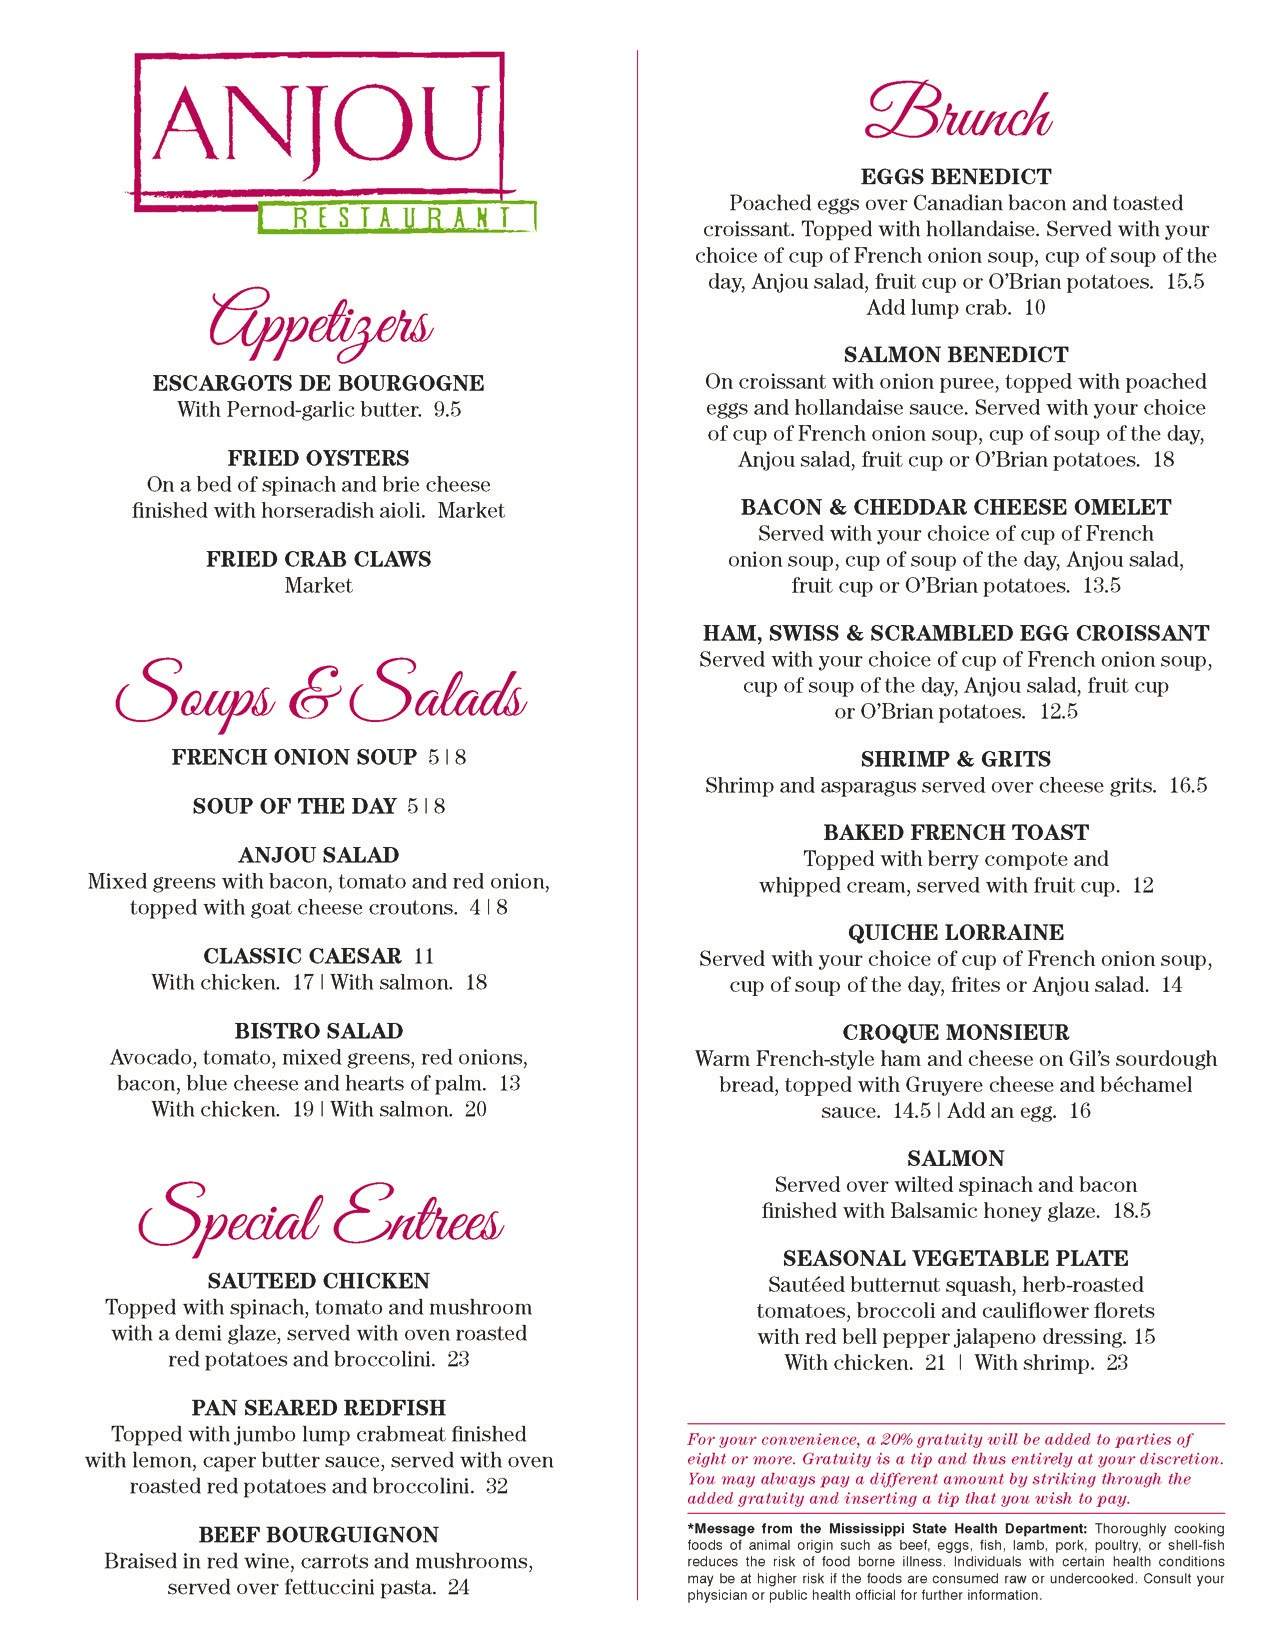 Mother's day event menu. view the PDF for accessibility options